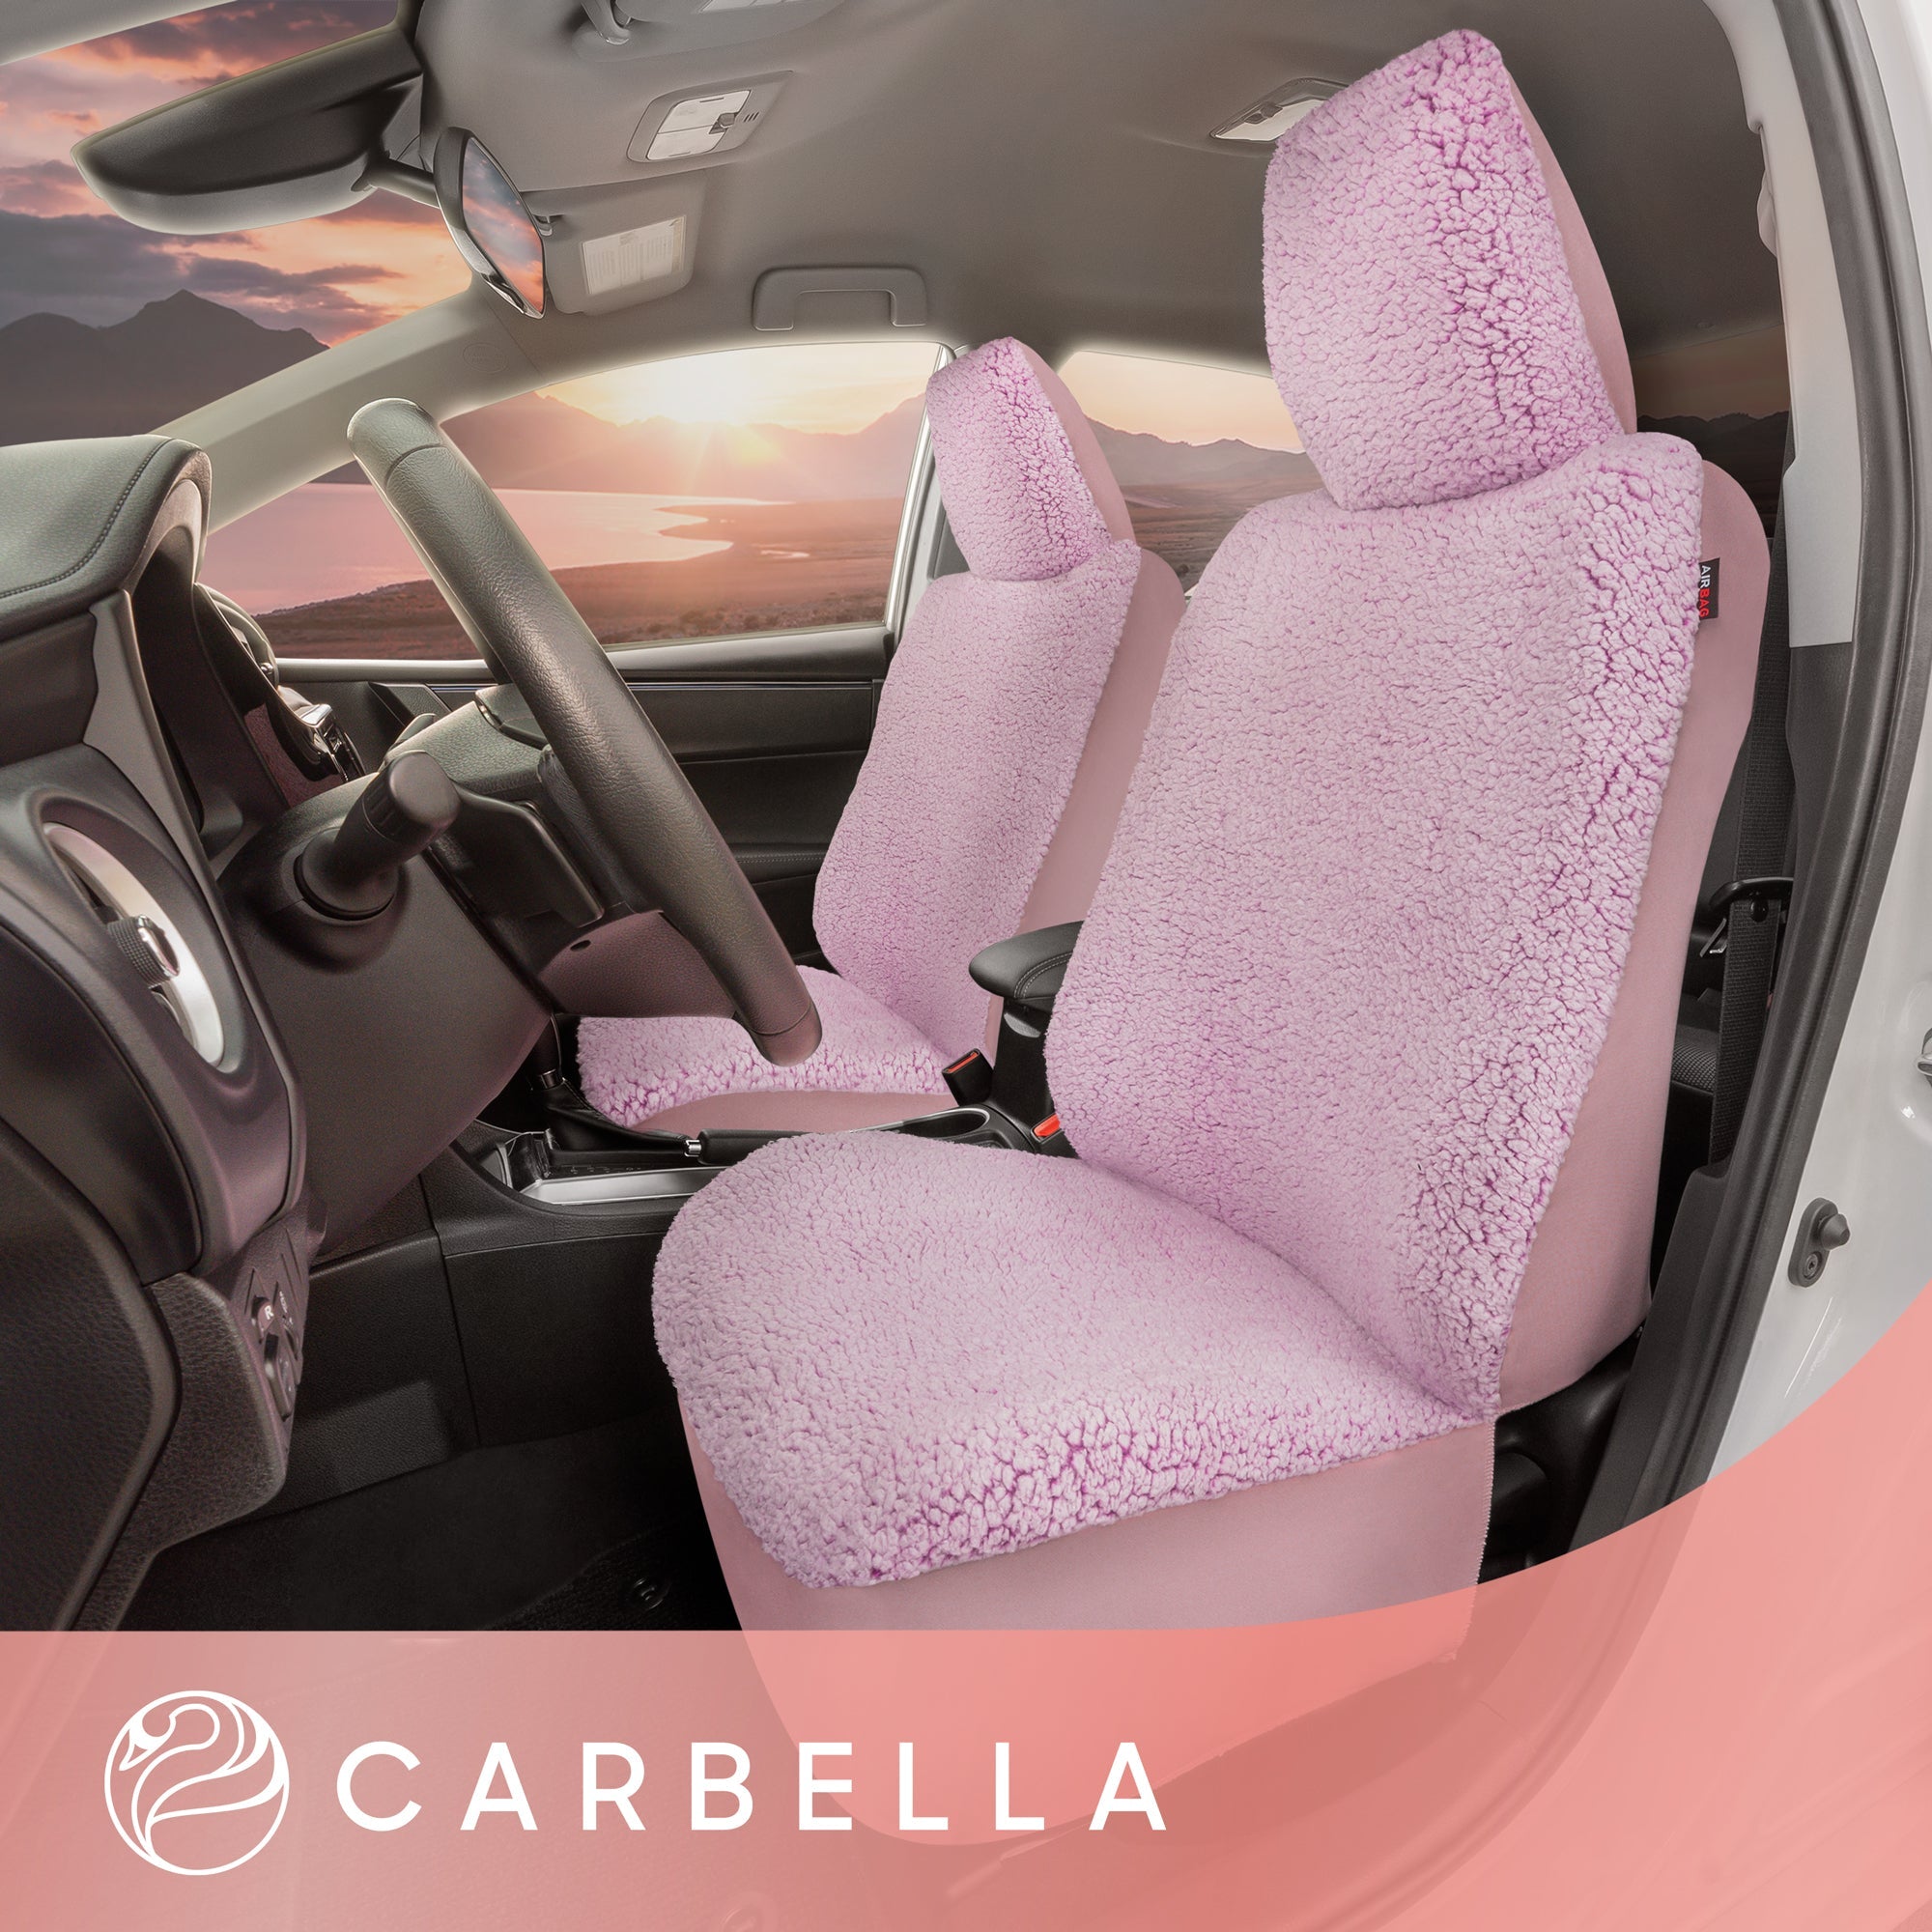 Carbella Plush Sherpa Fleece Car Seat Covers, 2 Pack Pink Seat Cover for Cars with Soft Cushioned Touch, Cute Automotive Interior Protector for Trucks Van SUV, Car Accessories for Women - Pink:#e0acd0